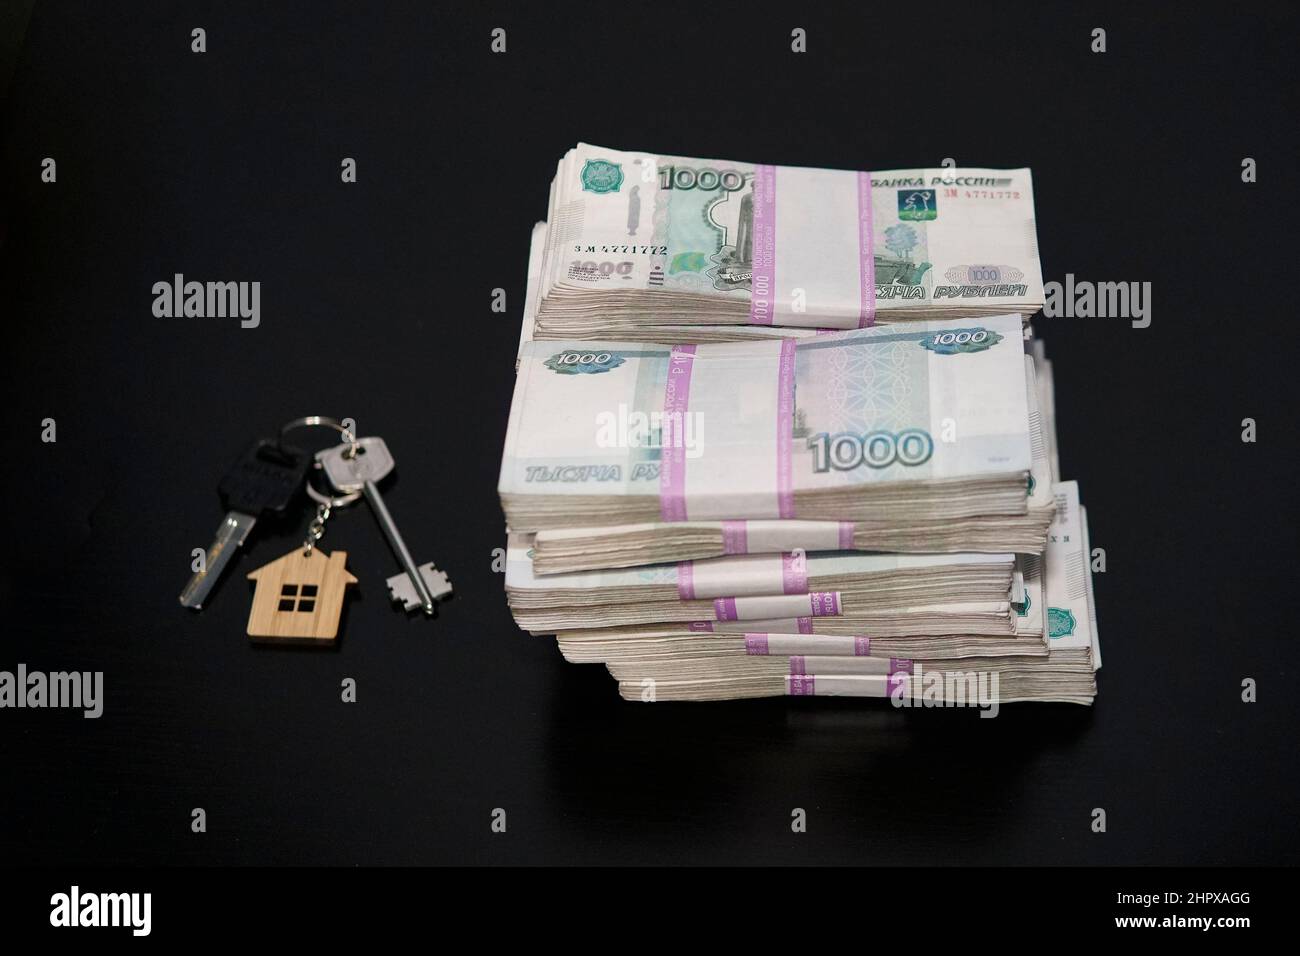 Banknotes of Russian rubles and keys to the apartment on the black table. Estate sale. The deal for the sale of the apartment. Concept. Stock Photo